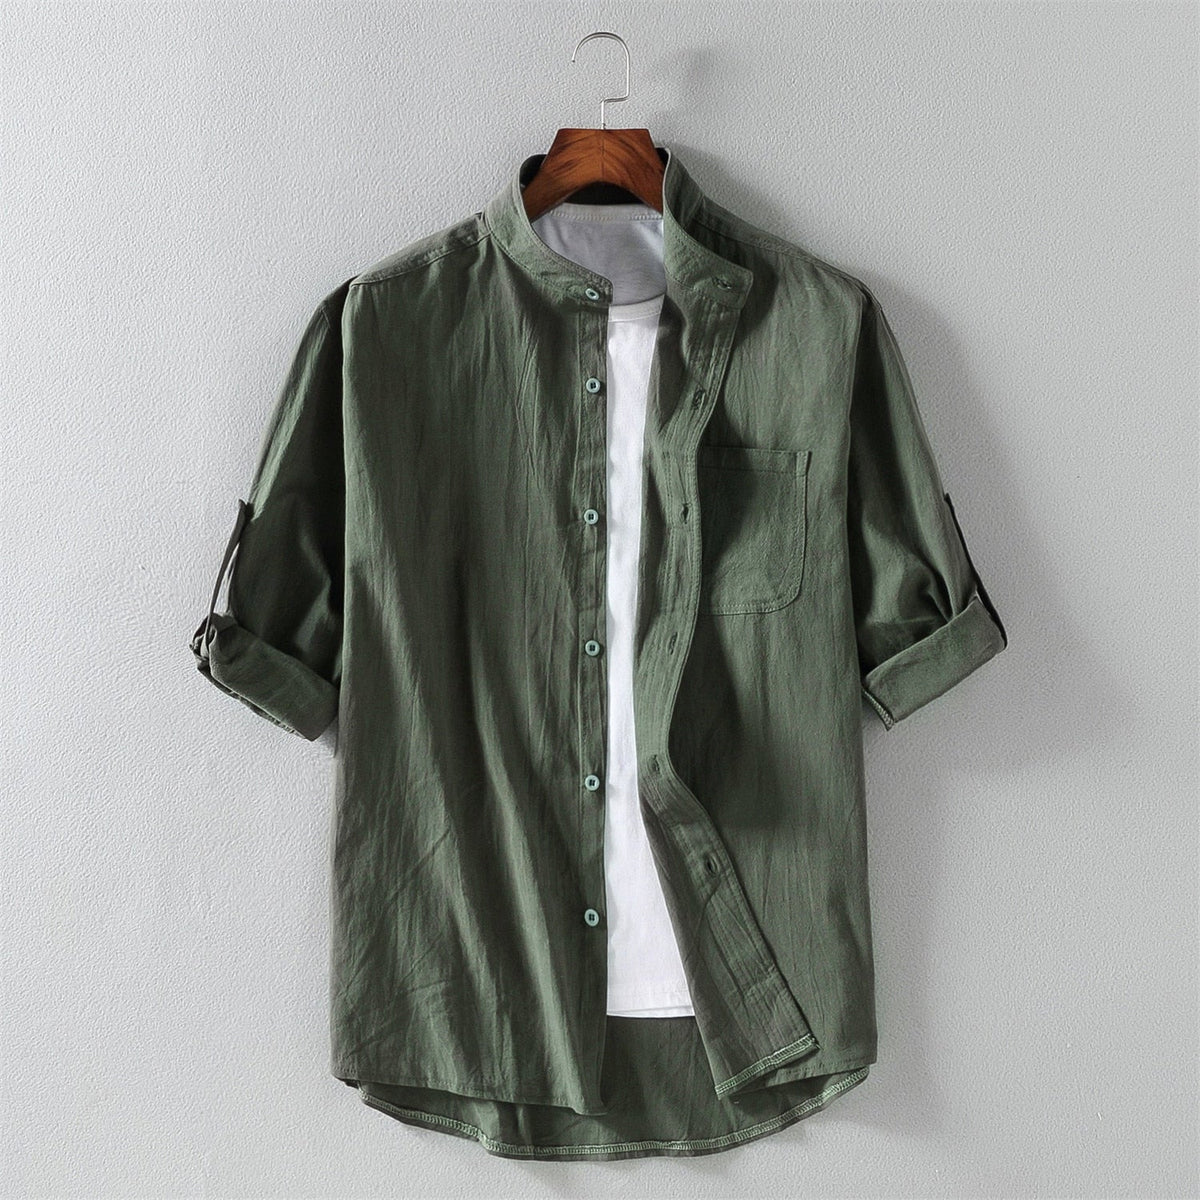 Evergreen Forest Collar 100% Cotton Mens Shirt | Hypoallergenic - Allergy Friendly - Naturally Free